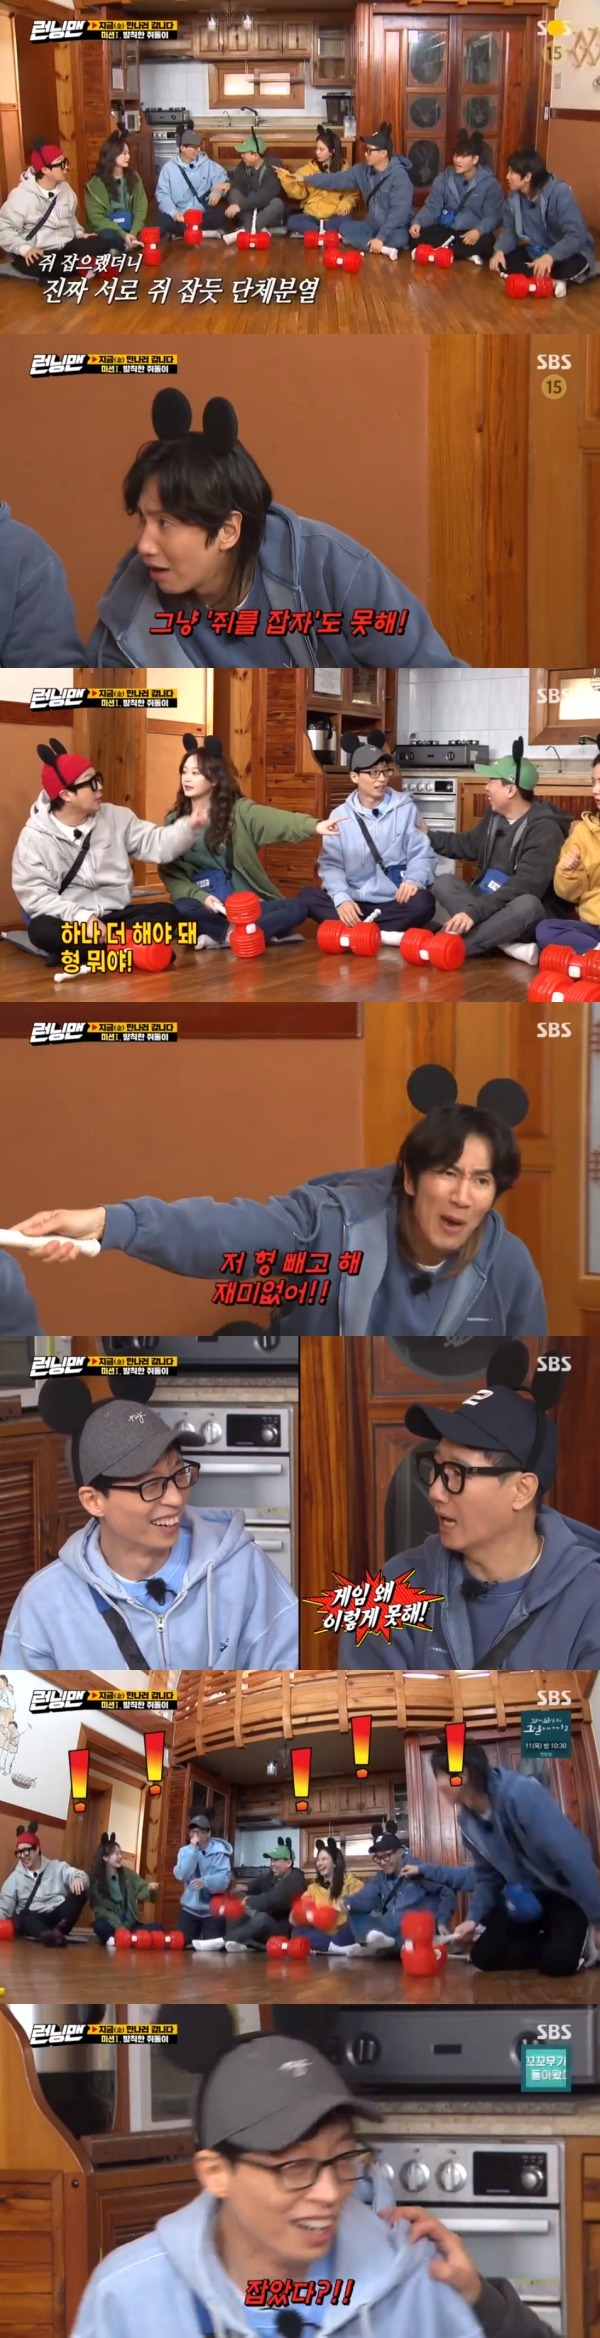 Seoul) = Yoo Jae-seoks Game has begun again.On SBS Running Man broadcasted on the 7th, a race was held to find the hidden gold in the village.Ji Seok-jin recruited Kim Jong-guk and Lee Kwang-soo, who sighed when his name was called, and Lee Kwang-soo frowned. Ji Seok-jin shared the special hint with Kim Jong-guk and Lee Kwang-soo.The rest were to be scattered as much as possible. Ji Seok-jins hint read, House is not the same House.There were various Houses in the village, such as the Hahane House, the doll House, the Movement House, and the Sleep House. Kim Jong Kook speculated that it was a House but not a House but a dog House or a new House.Jeon So-min chose The House of Reading. Jeon So-min said, The pRace where Yoo Jae-seok left is always the right answer. Yang chose the House in the middle of the filming site.Yoo Jae-seok chose Byeong-gus House. It was because he was suspicious that the name of the PD was released without any hesitation.The closest to the gold was Yang Se-chan. Ha-ha saw it. They decided to keep it a secret. Yang Se-chan and Ha-ha wandered and found hints.Hint was pointing to Seokjins House and Jaseoks House.The first mission was a fucking rat that transformed Catch the Rat; the existing Game was added Fugitive; all members were unable to adapt to the new rules and kept wrong.In particular, Yoo Jae-seok showed his unique Game depression and was wrong one after another. Eventually, the members promised to make it easier to overcome the Game depression, except for running away.However, Yoo Jae-seok was still a hole. Haha told Yoo Jae-seok, Why do you look at MC well?